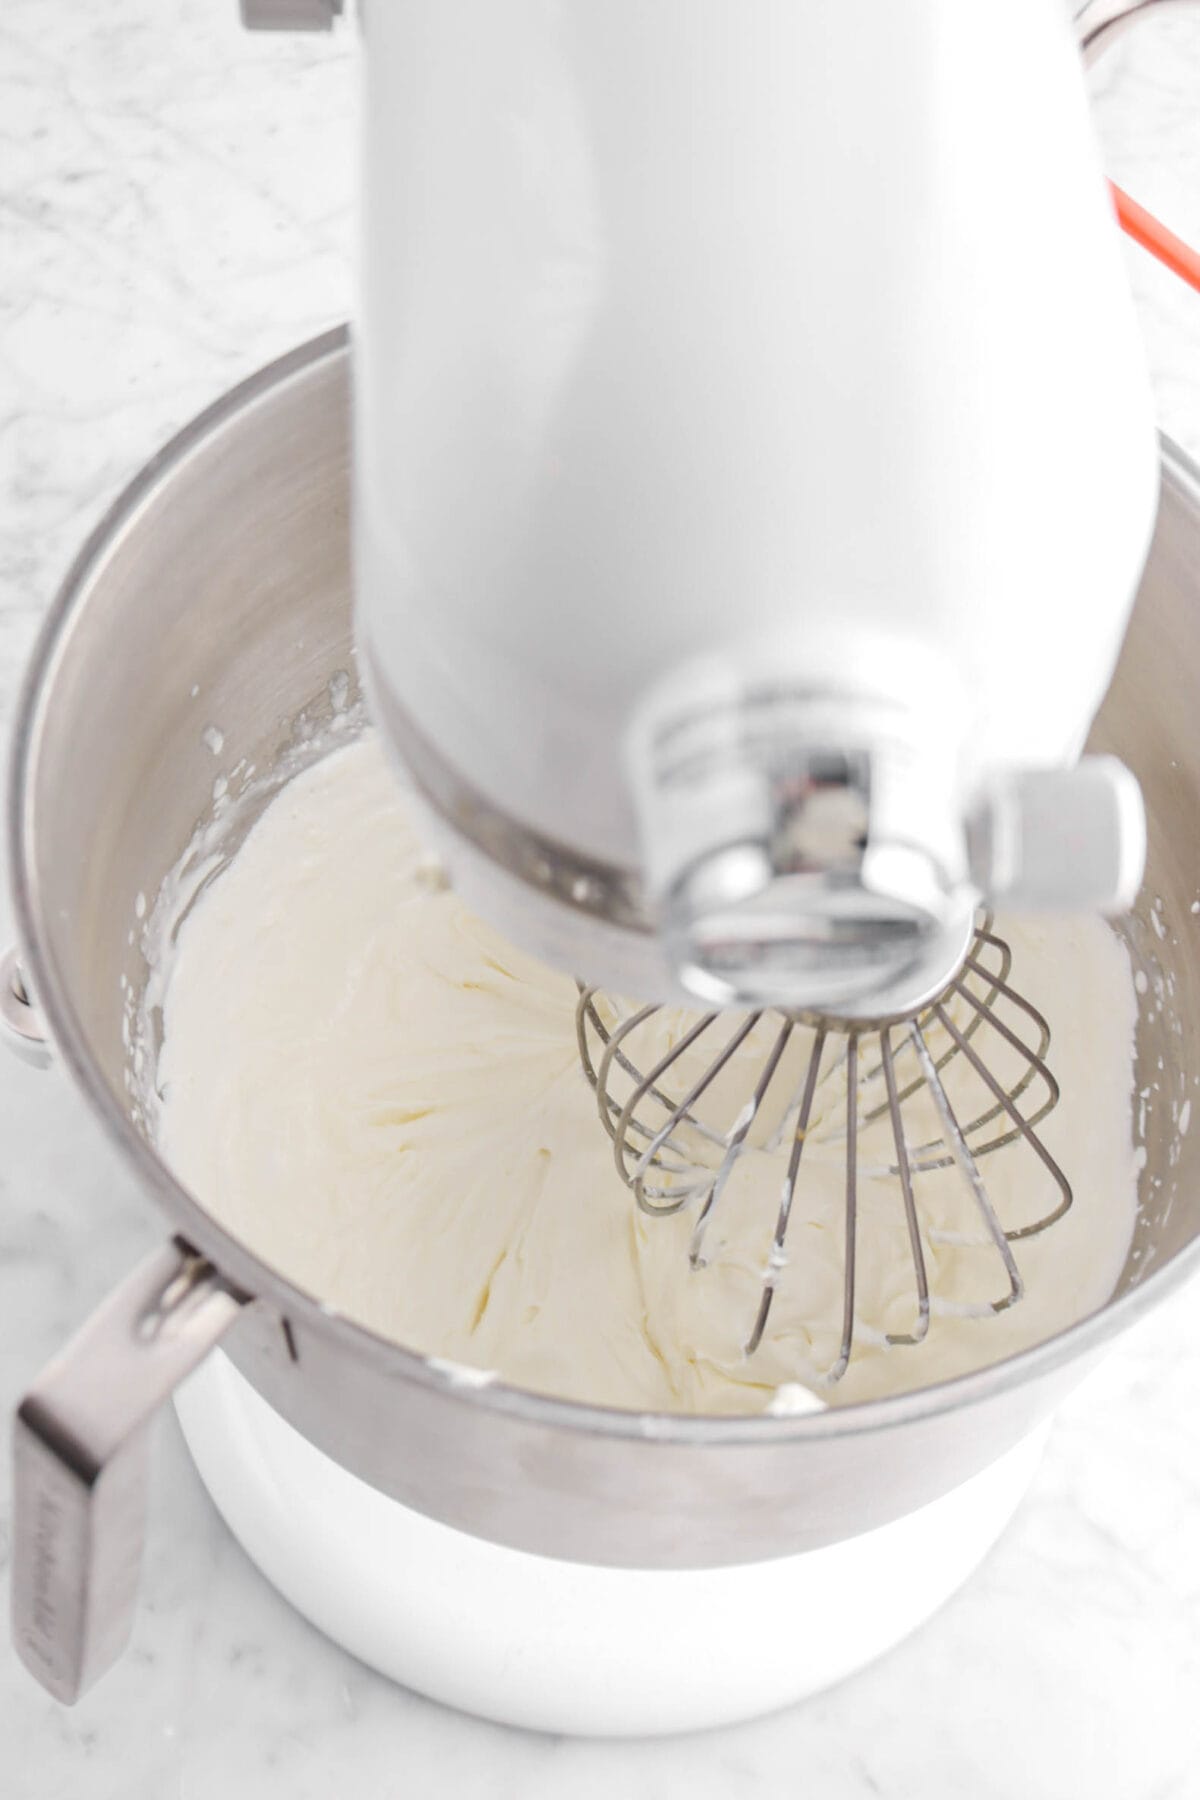 whipped cream and mascarpone in stand mixer